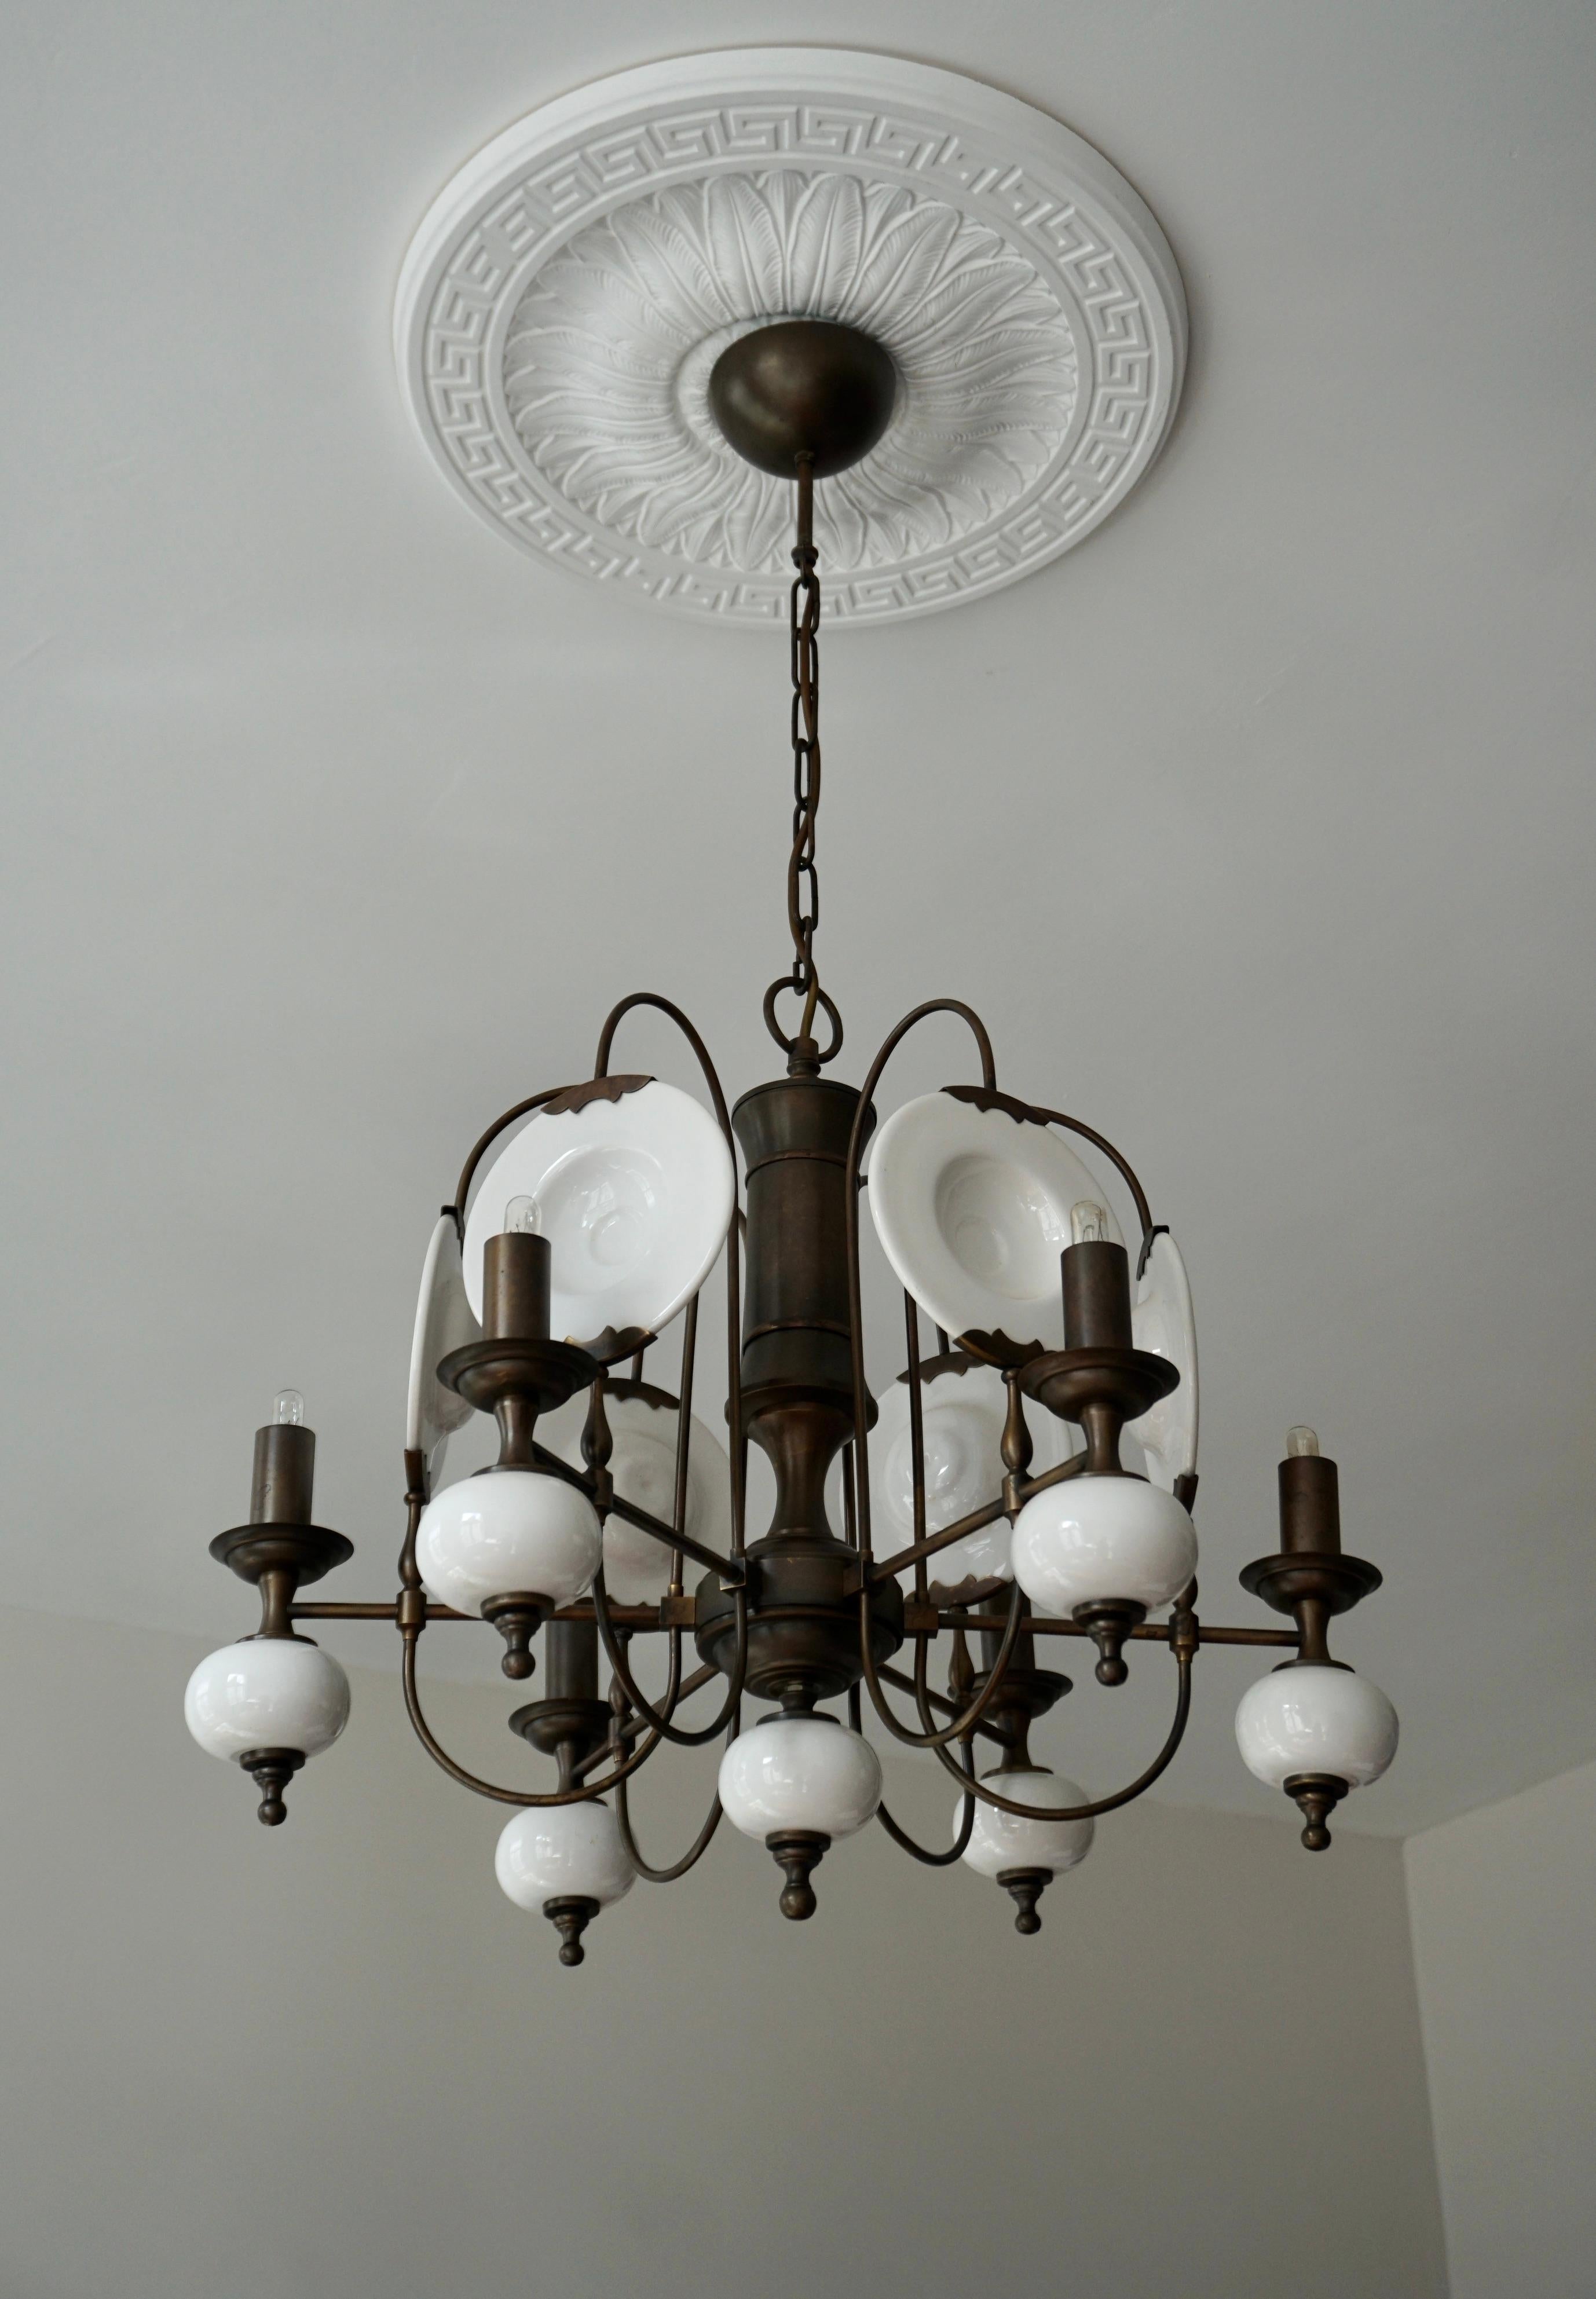 Italian chandelier in brass and white porcelain.
The light requires six single E14 screw fit lightbulbs (60Watt max.) LED compatible.

Diameter 22.8